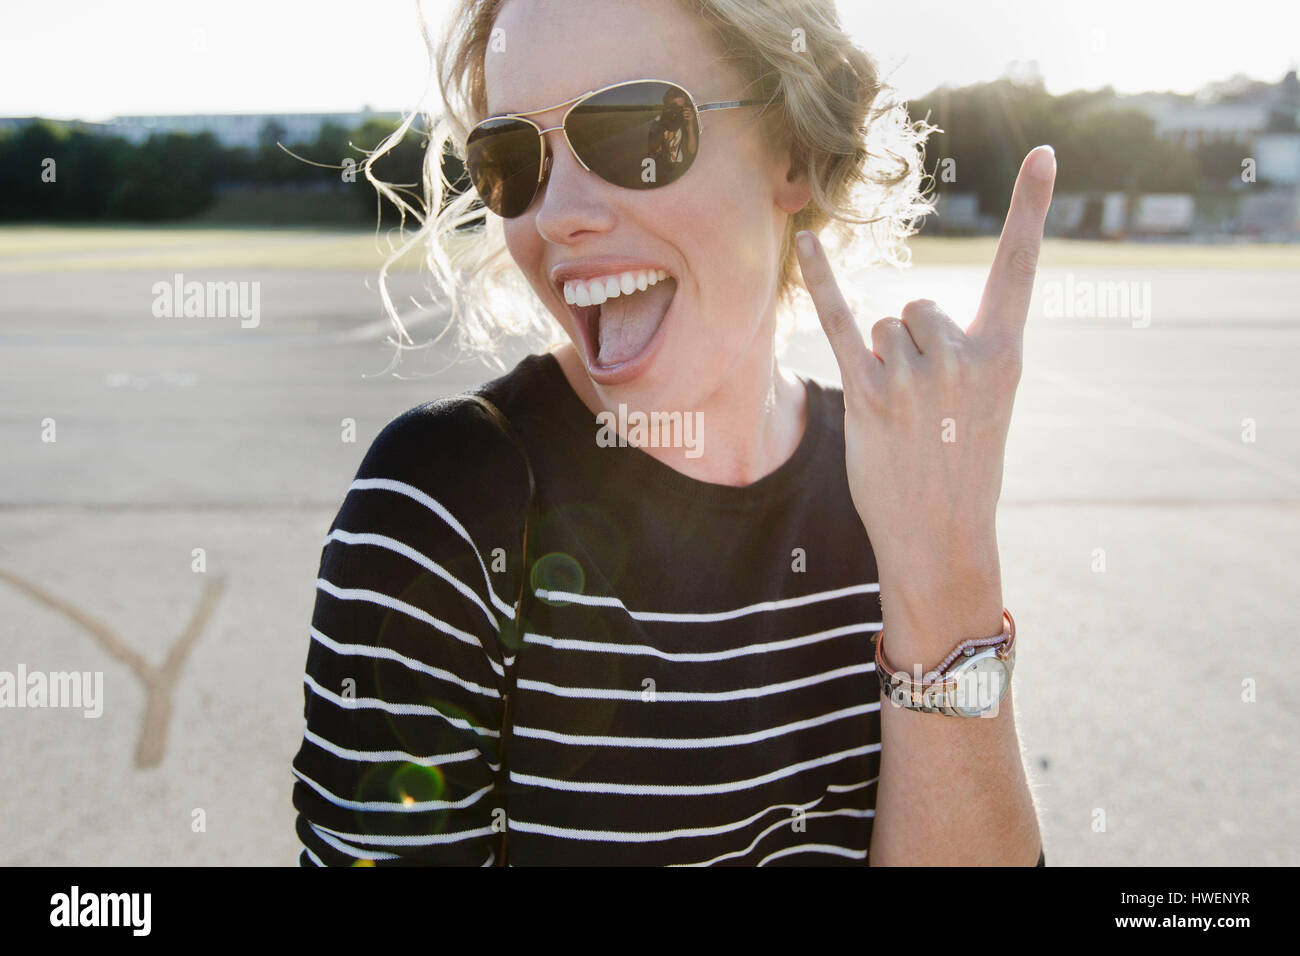 Portrait of mid adult woman wearing sunglasses making hand gesture Stock Photo